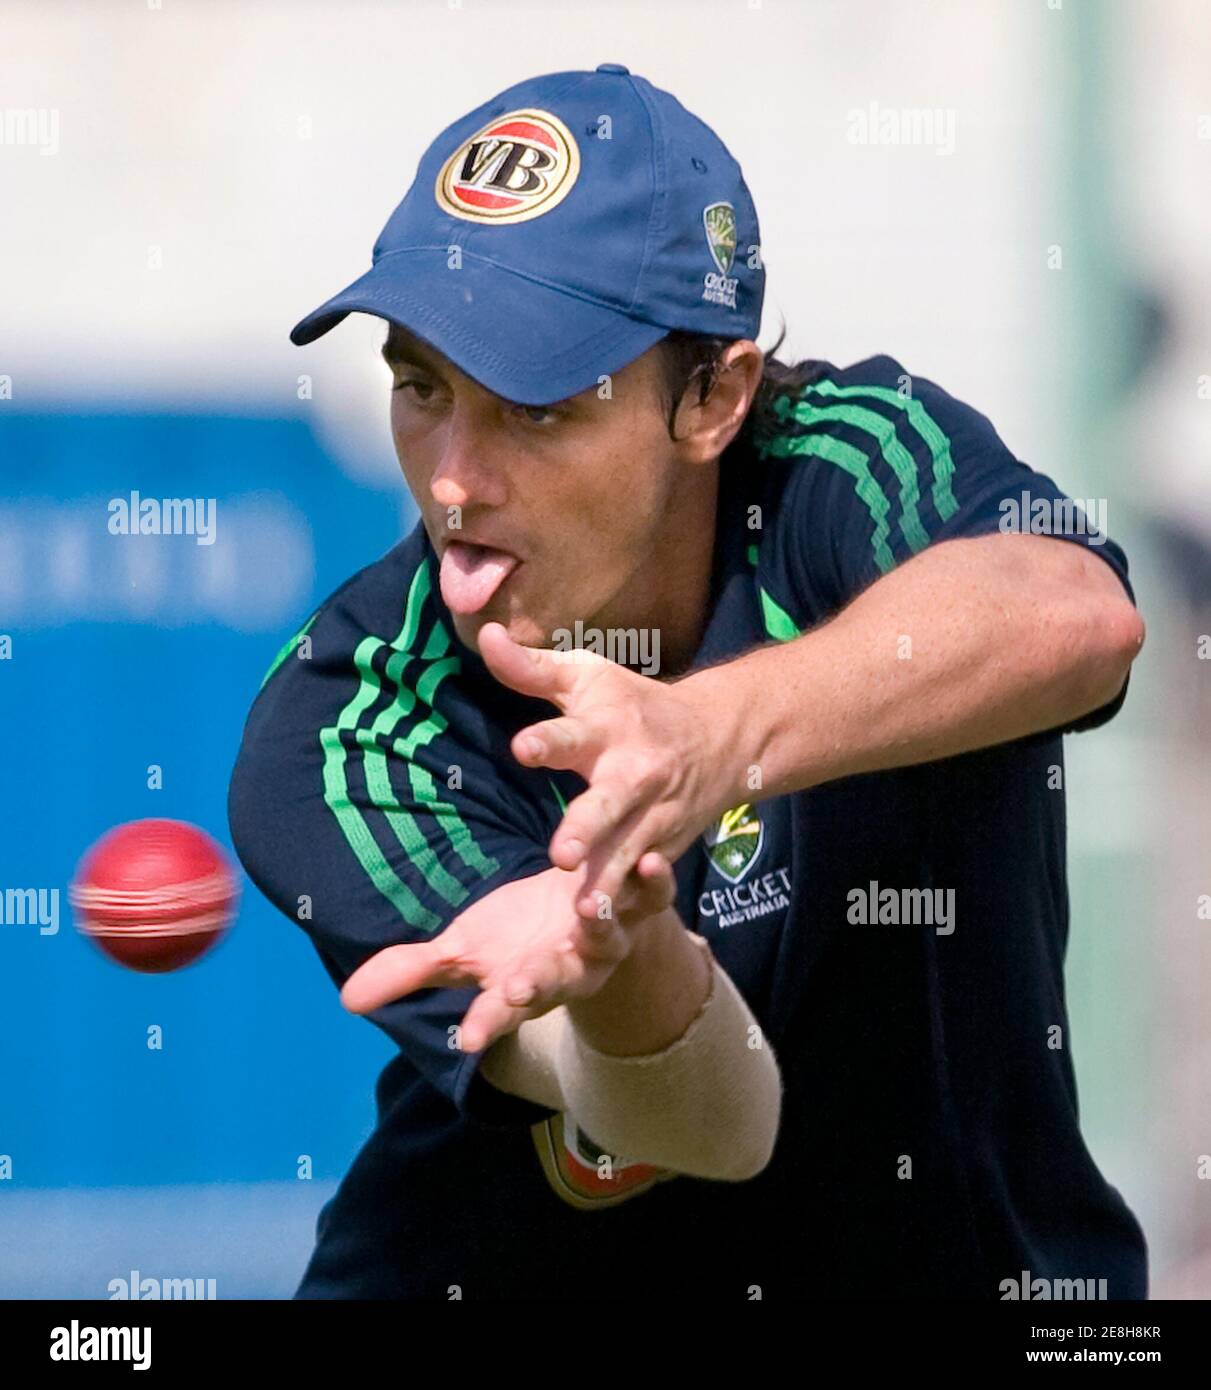 Australia's Beau Casson concentrates on his catch during training at Kensington Oval in Bridgetown, Barbados June 11, 2008. Australia will meet West Indies in their third and final test cricket match beginning on Thursday.      REUTERS/Andy Clark     (BARBADOS) Stock Photo